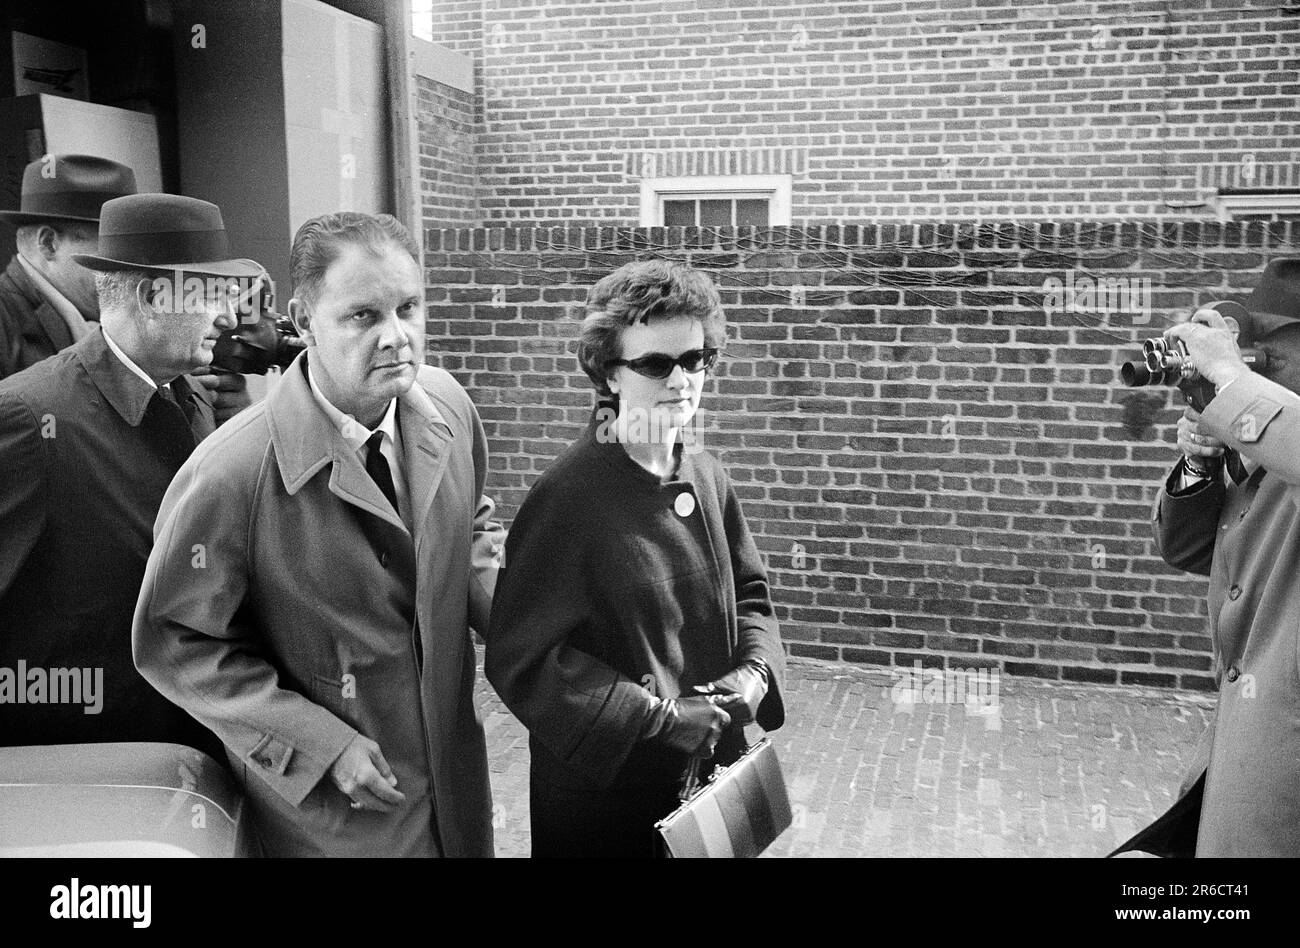 Marina Oswald, Lee Harvey Oswald's wife, arriving at President's Commission on the Assassination of President Kennedy or Warren Commission hearing, Washington, D.C., USA, Marion S. Trikosko, U.S. News & World Report Magazine Photograph Collection, February 3, 1964 Stock Photo